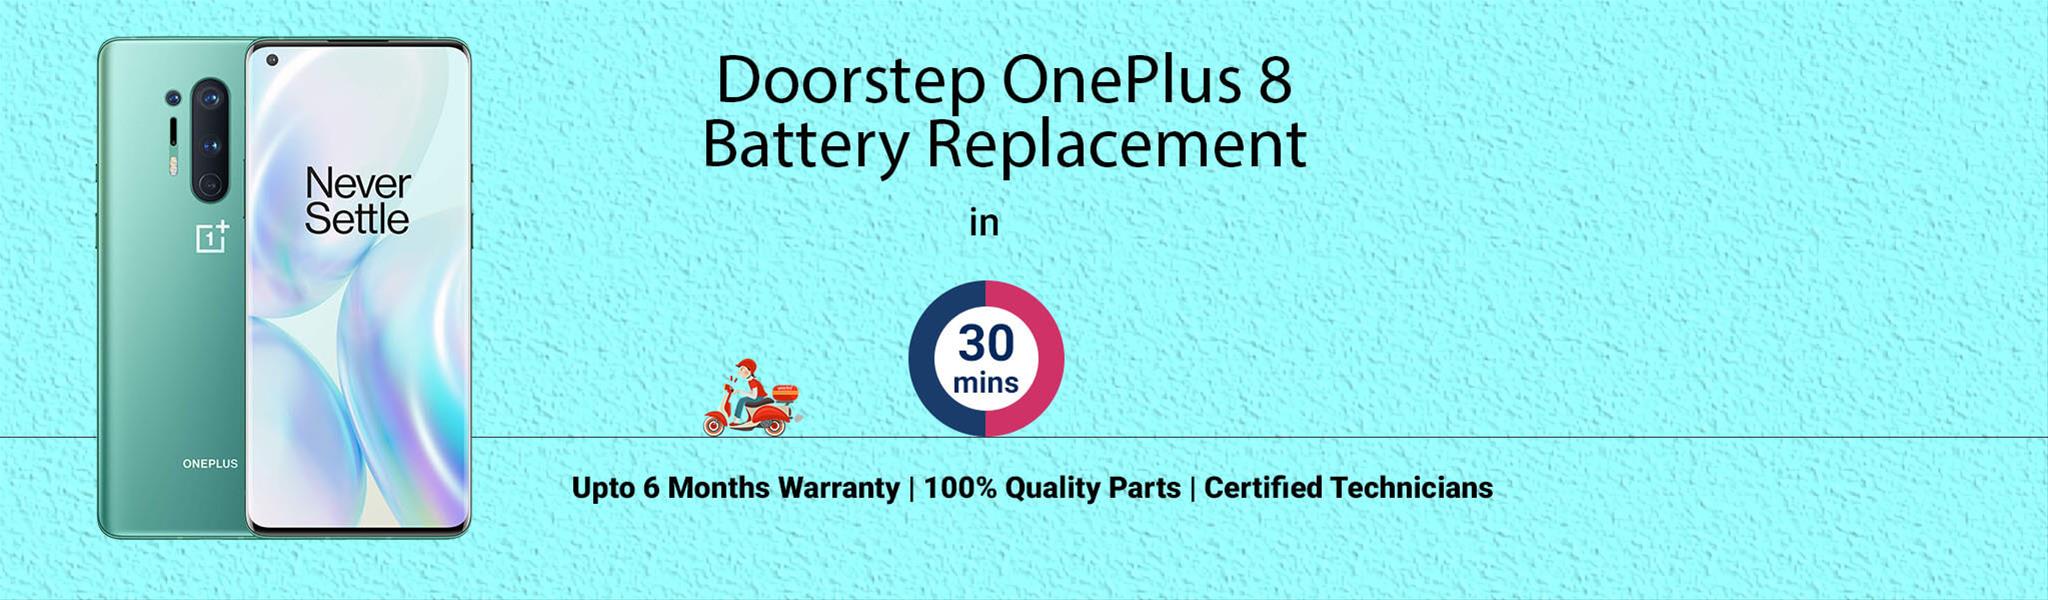 oneplus-8-battery-replacement.jpg